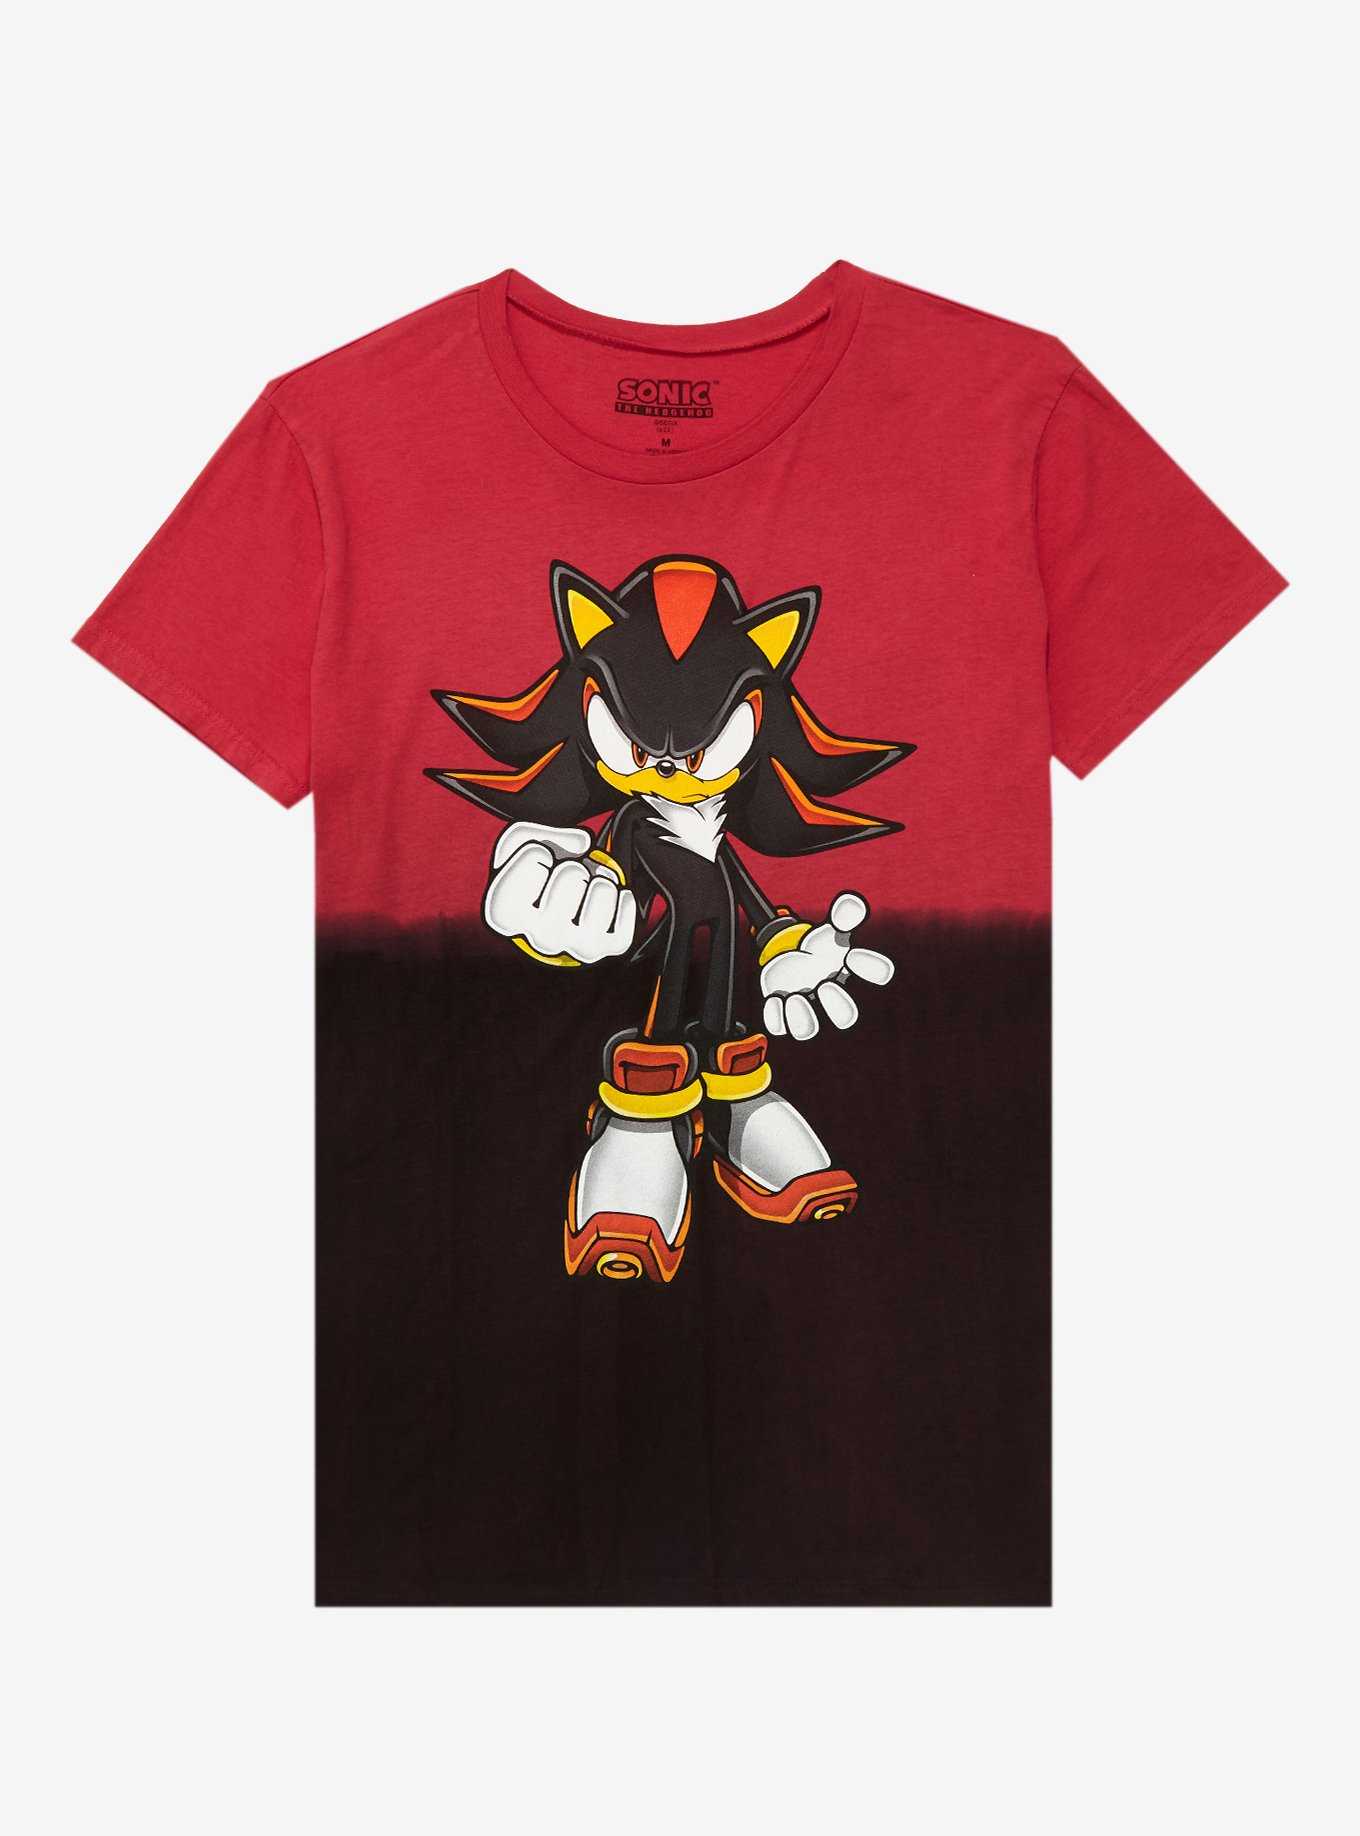 Is Shadow the Hedgehog affected by the white space in Sonic